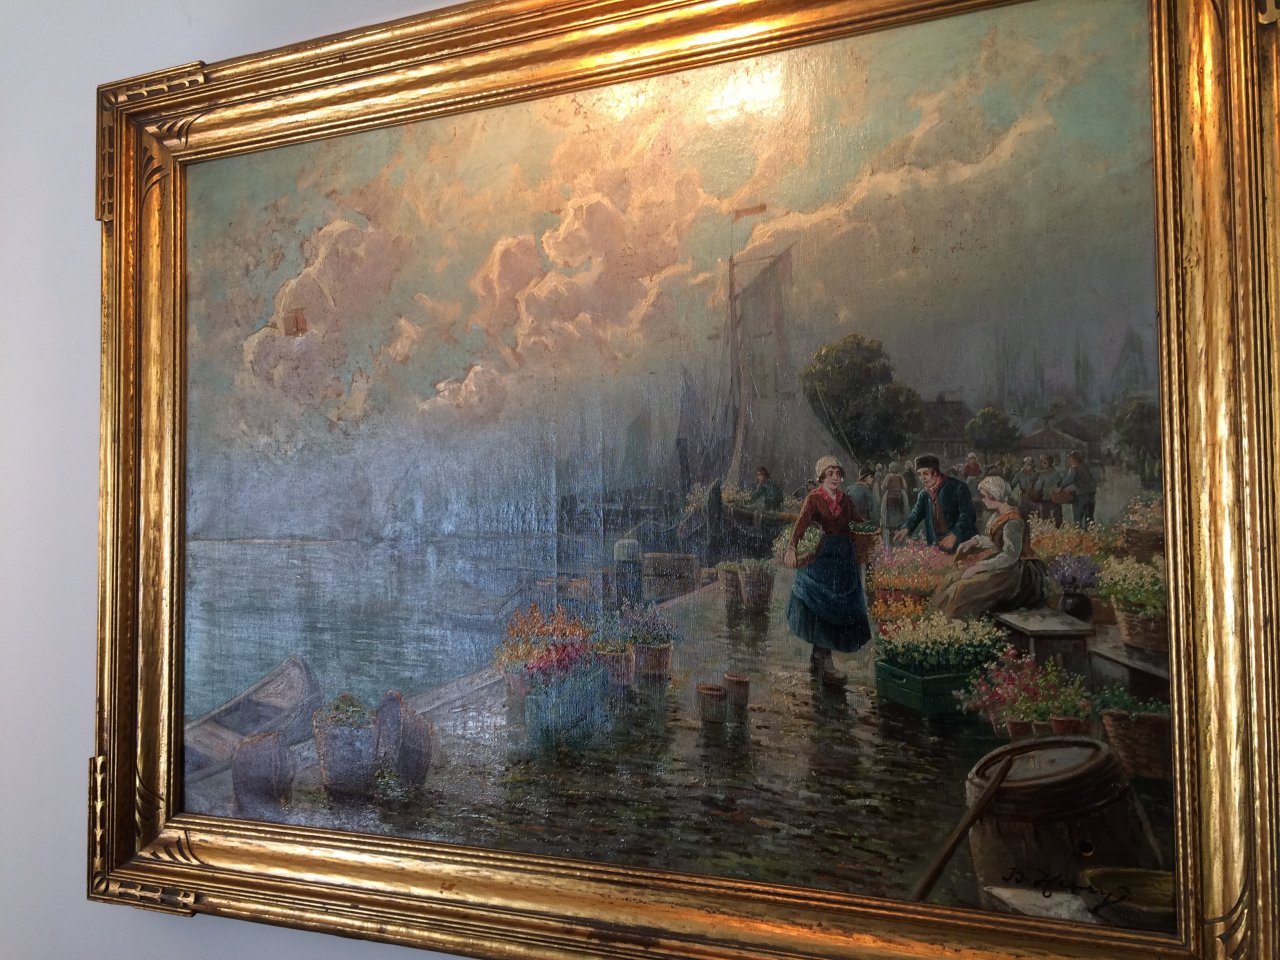 Who Is The Artist Of This Old Oil Painting? | Artifact Collectors